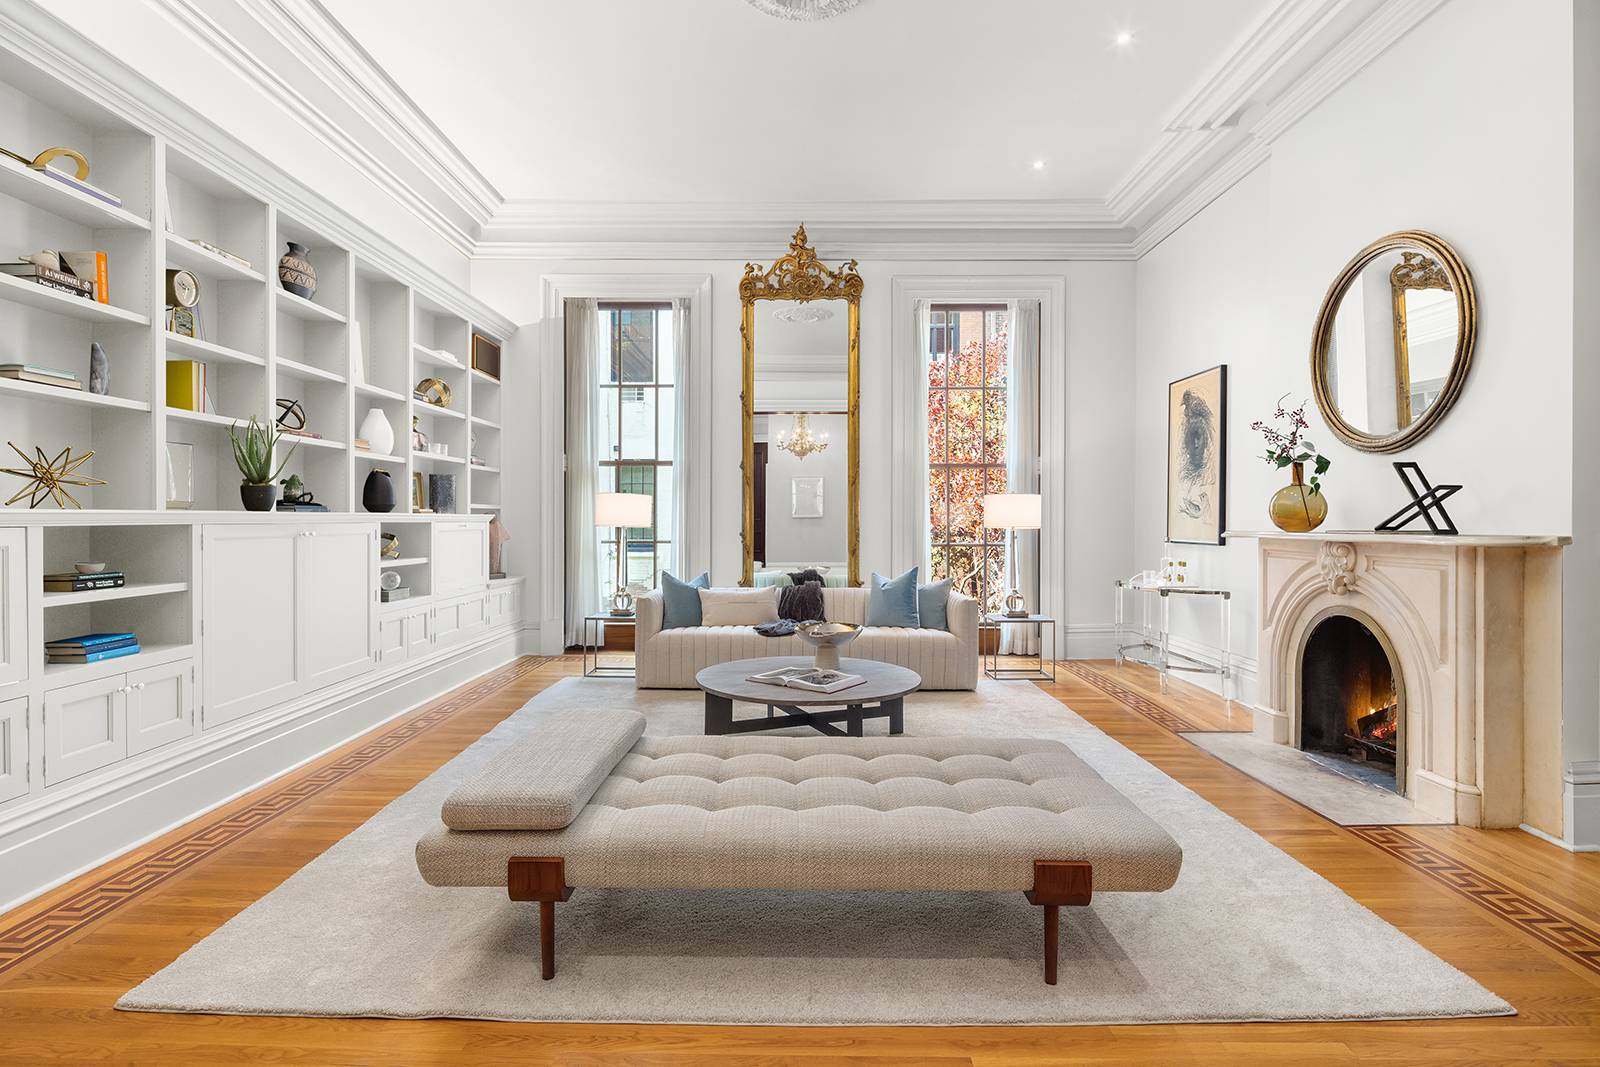 Stunning Grand Mansion on the Real Billionaire's Row Welcome to this magnificent 6 story townhome on one of Manhattan's most coveted blocks, along the Gold Coast of Greenwich Village.